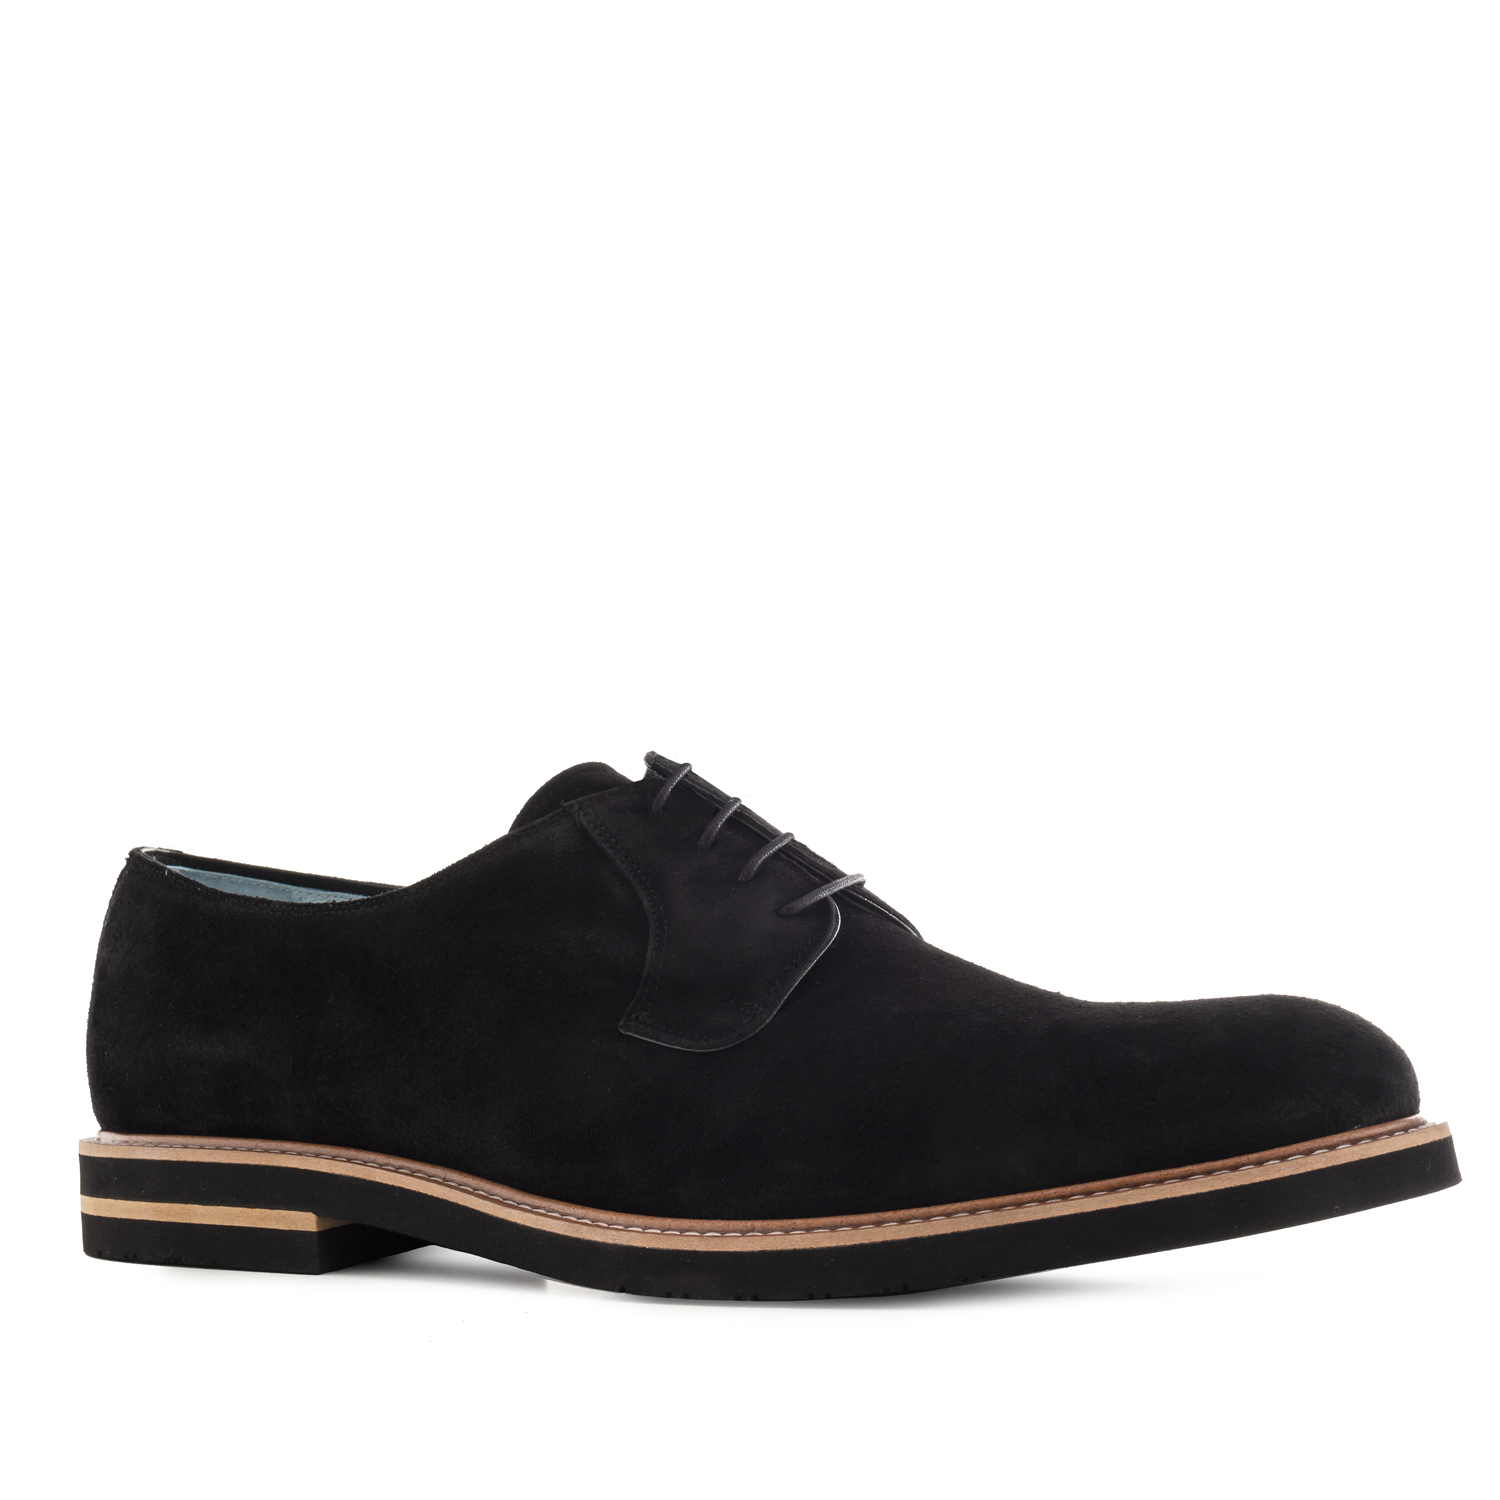 Oxford Shoes in Black Split Leather 